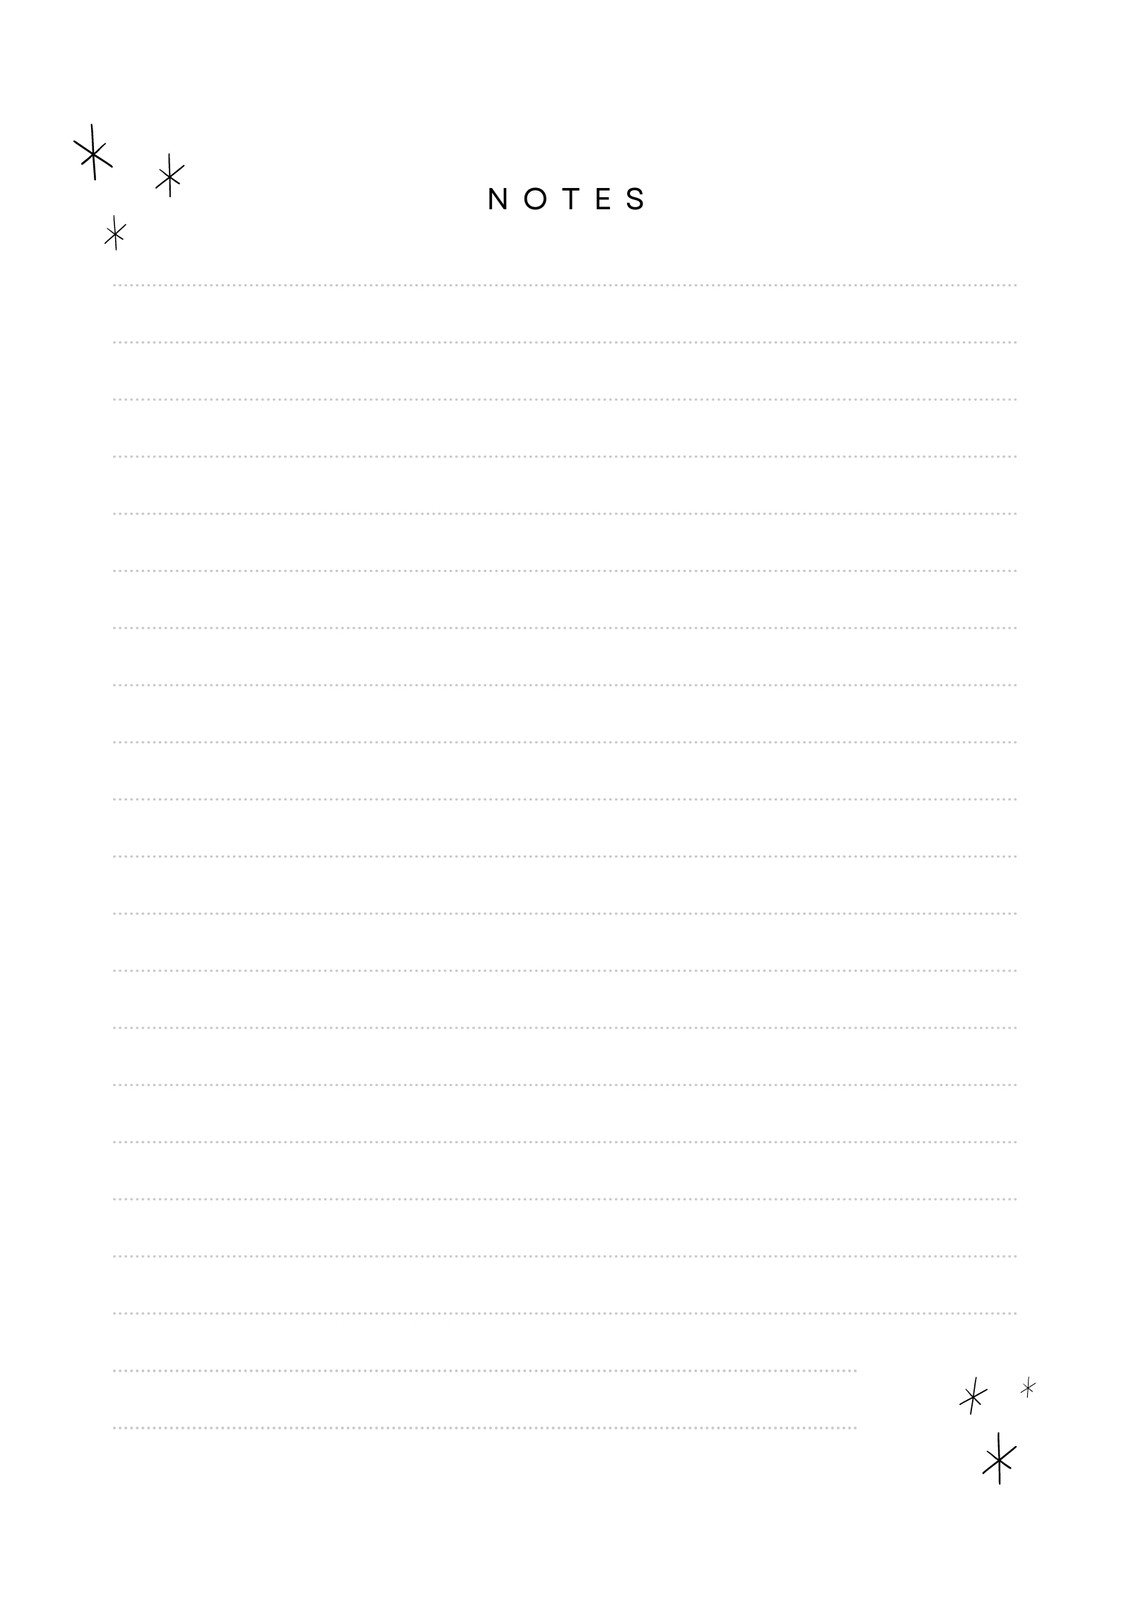 How to Create Note Templates in Apple Notes